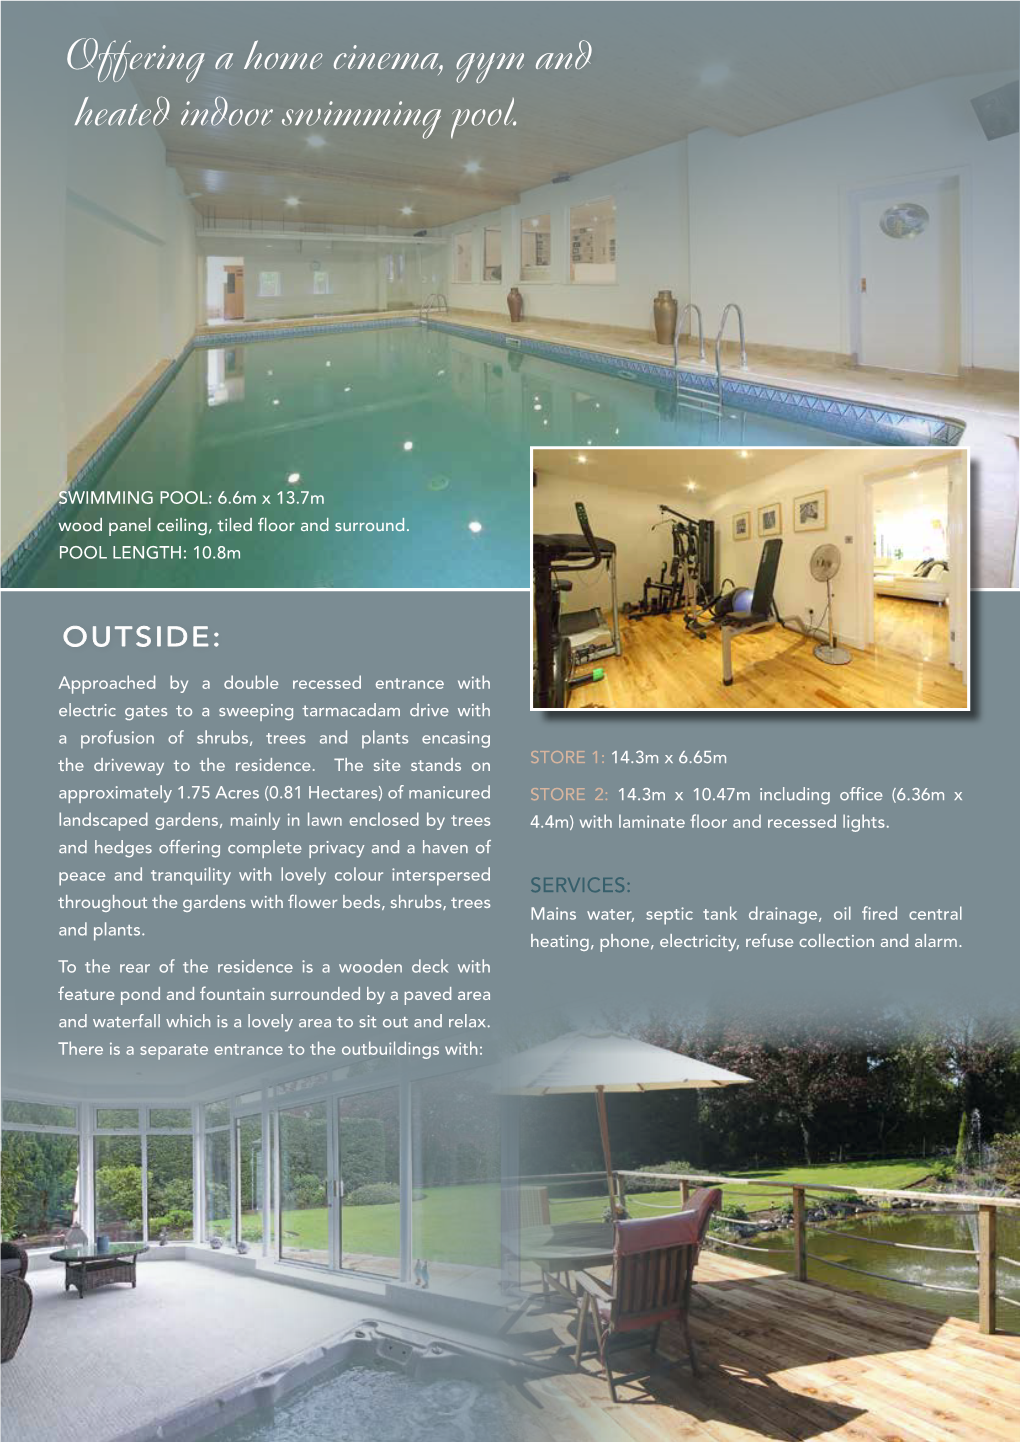 Offering a Home Cinema, Gym and Heated Indoor Swimming Pool